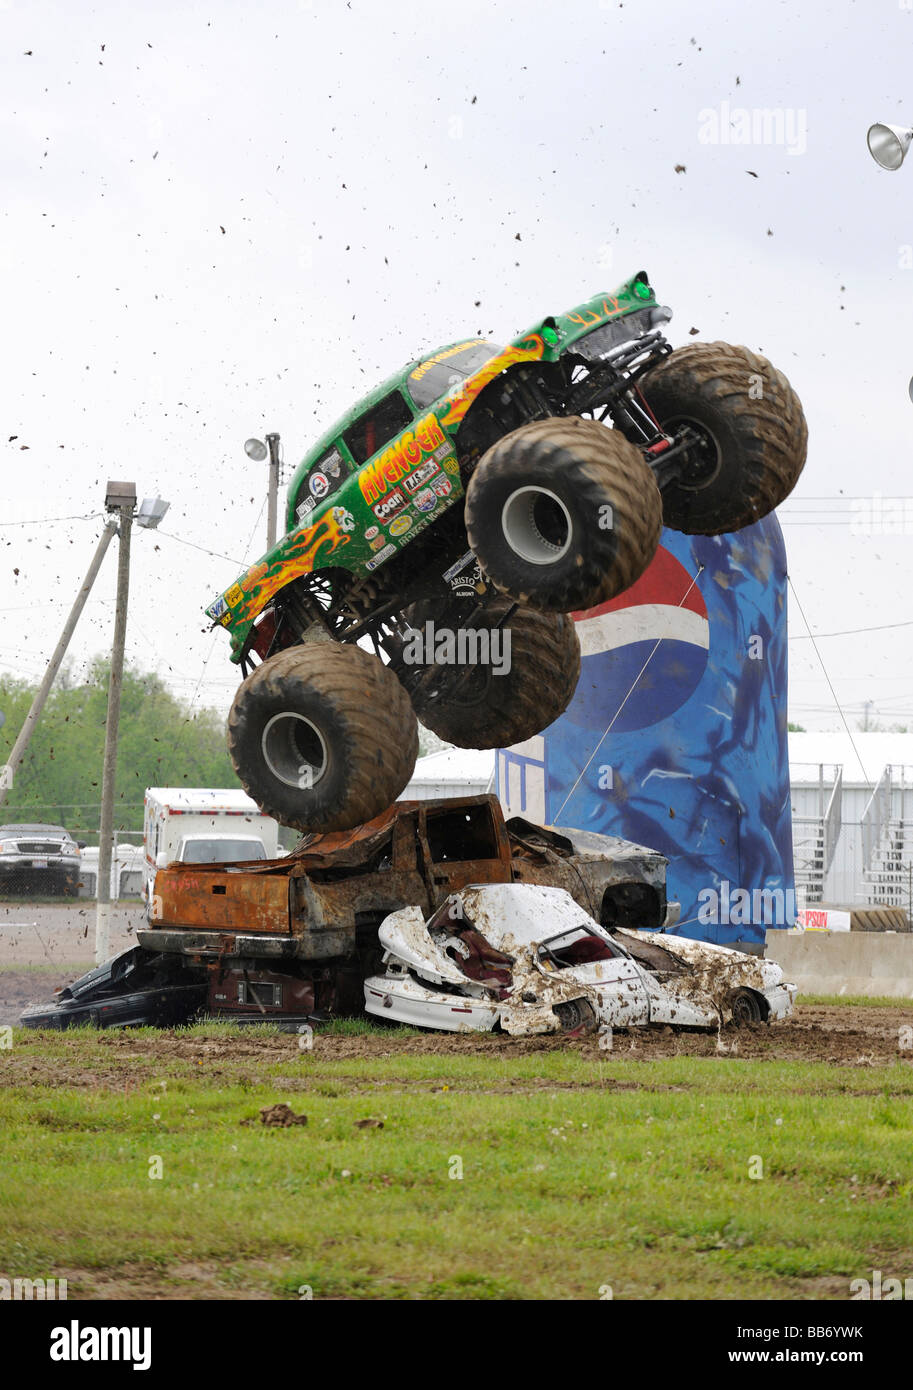 Avenger monster truck in freestyle a 4x4 Off-Road Jamboree Monster Truck Show Foto Stock